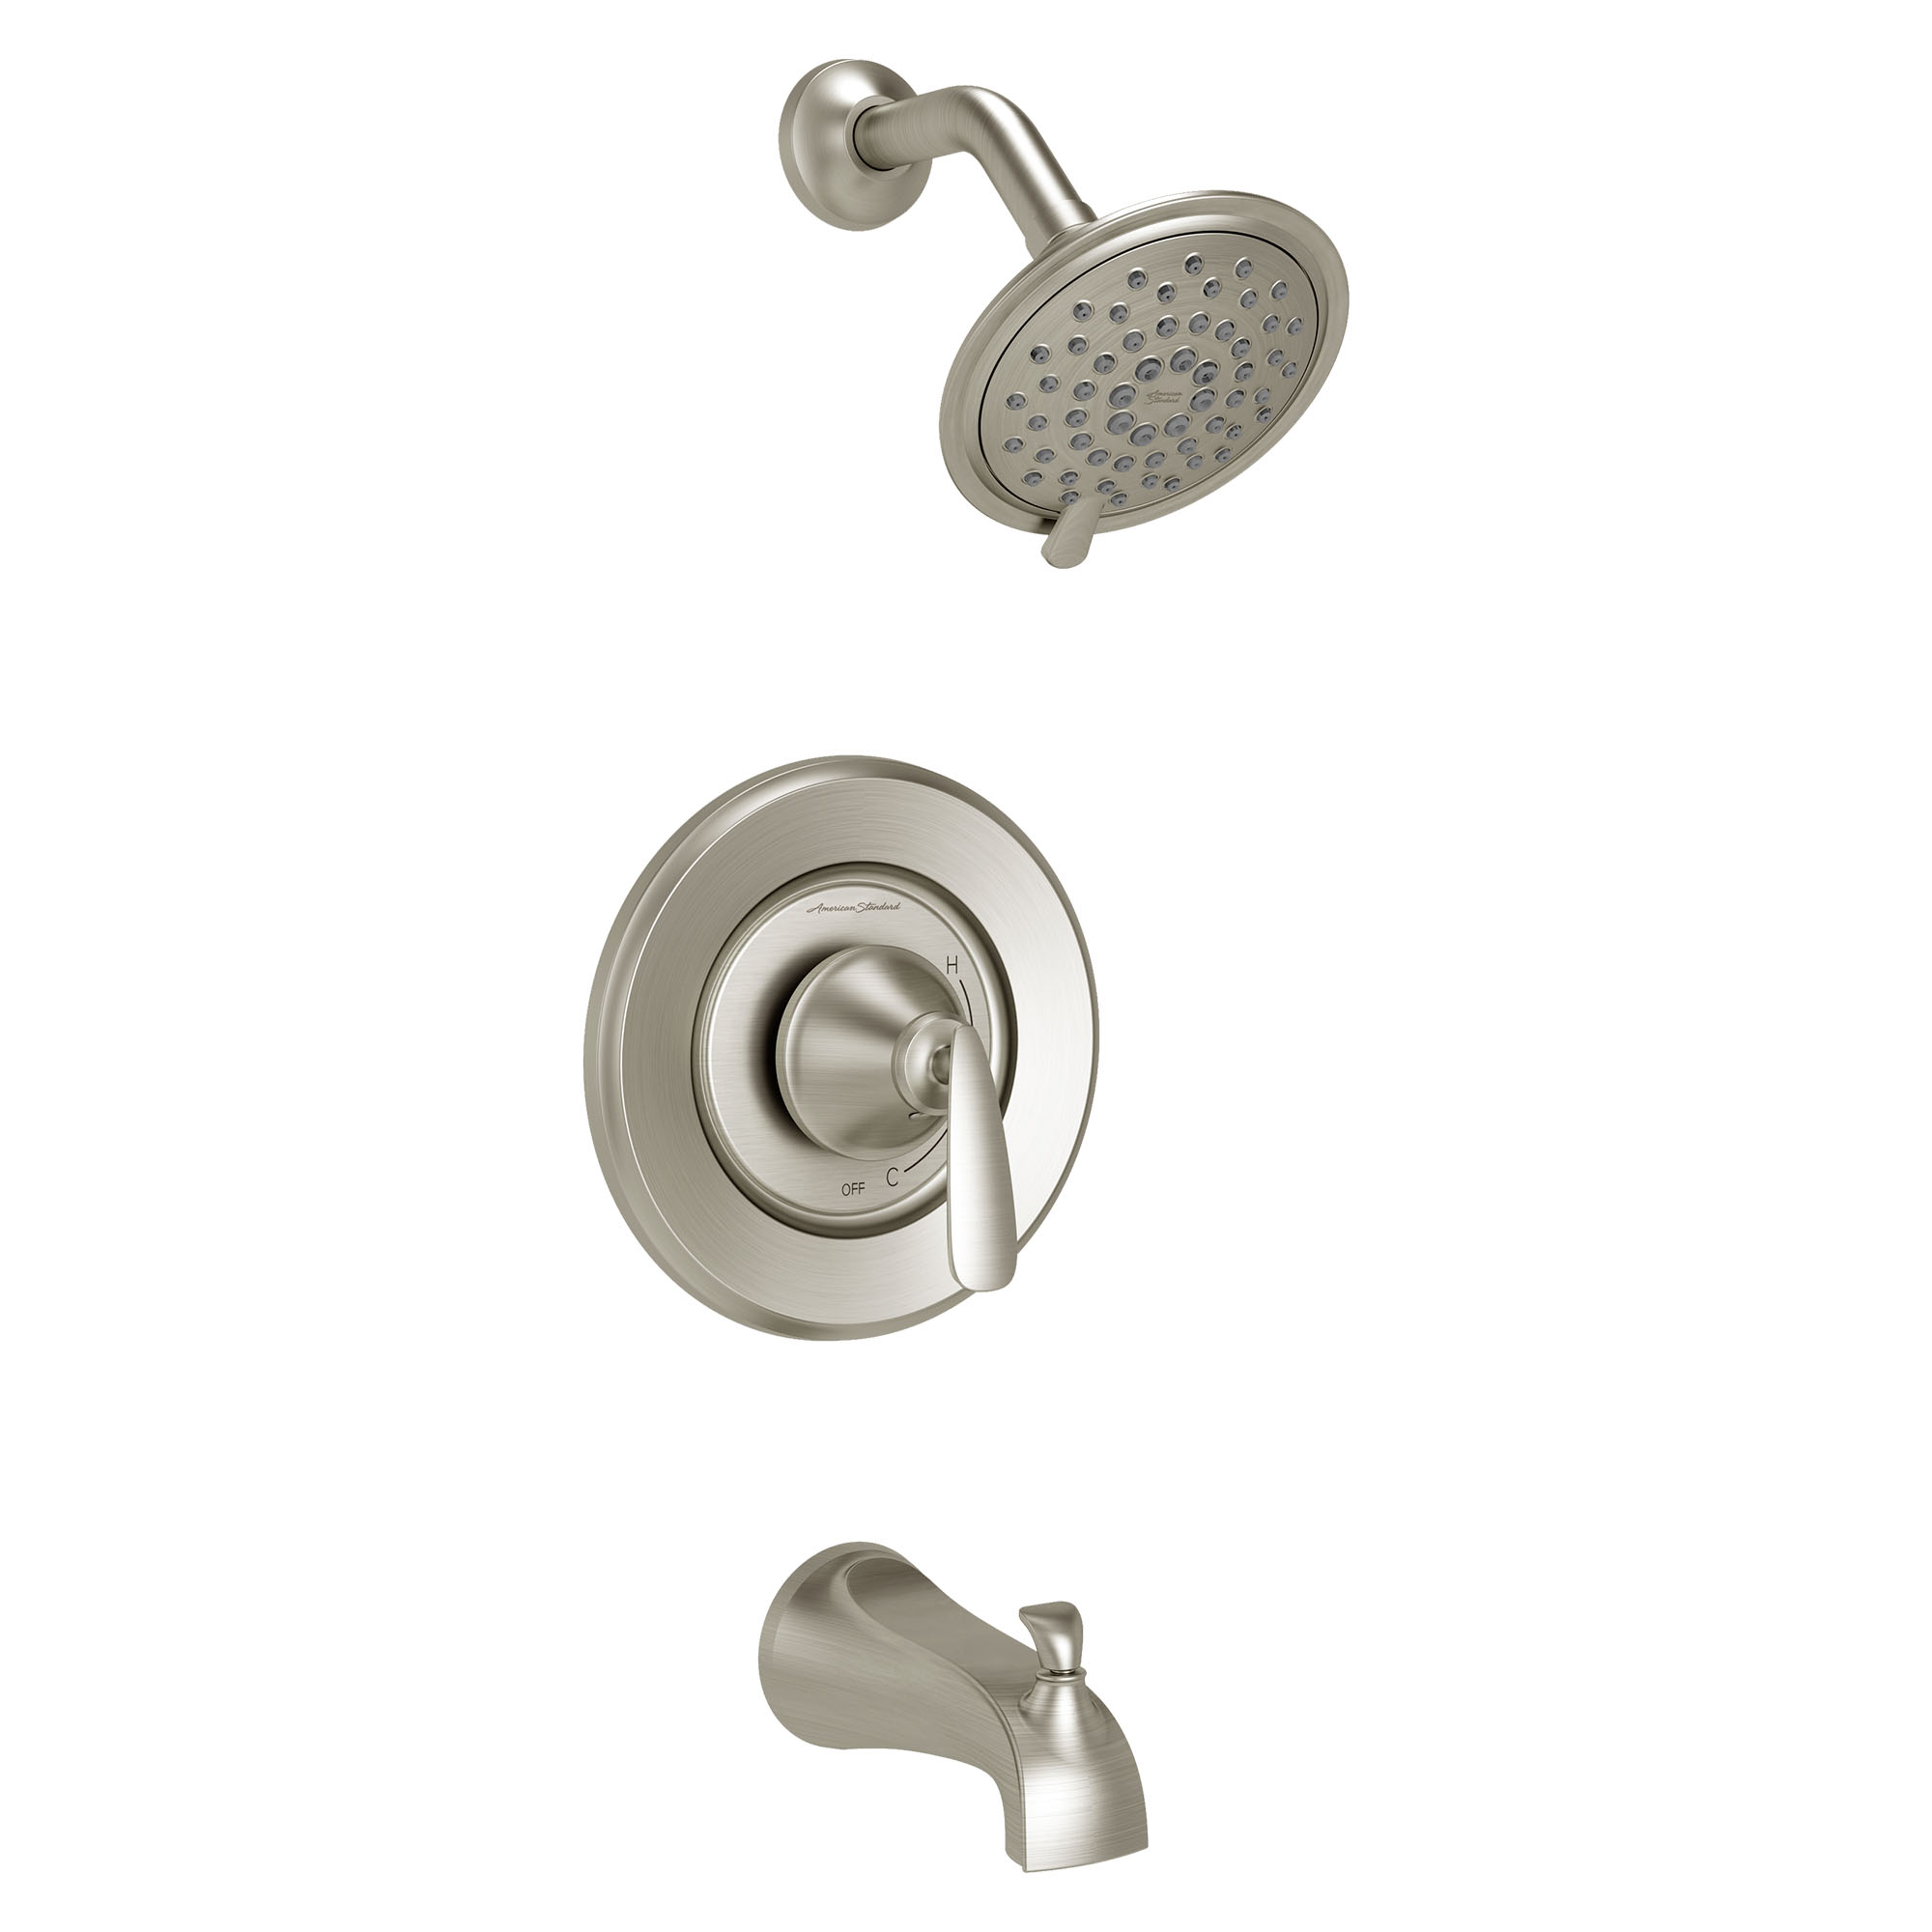 Somerville 1.8 GPM Tub and Shower Trim Kit with Ceramic Disc Valve Cartridge and Lever Handle